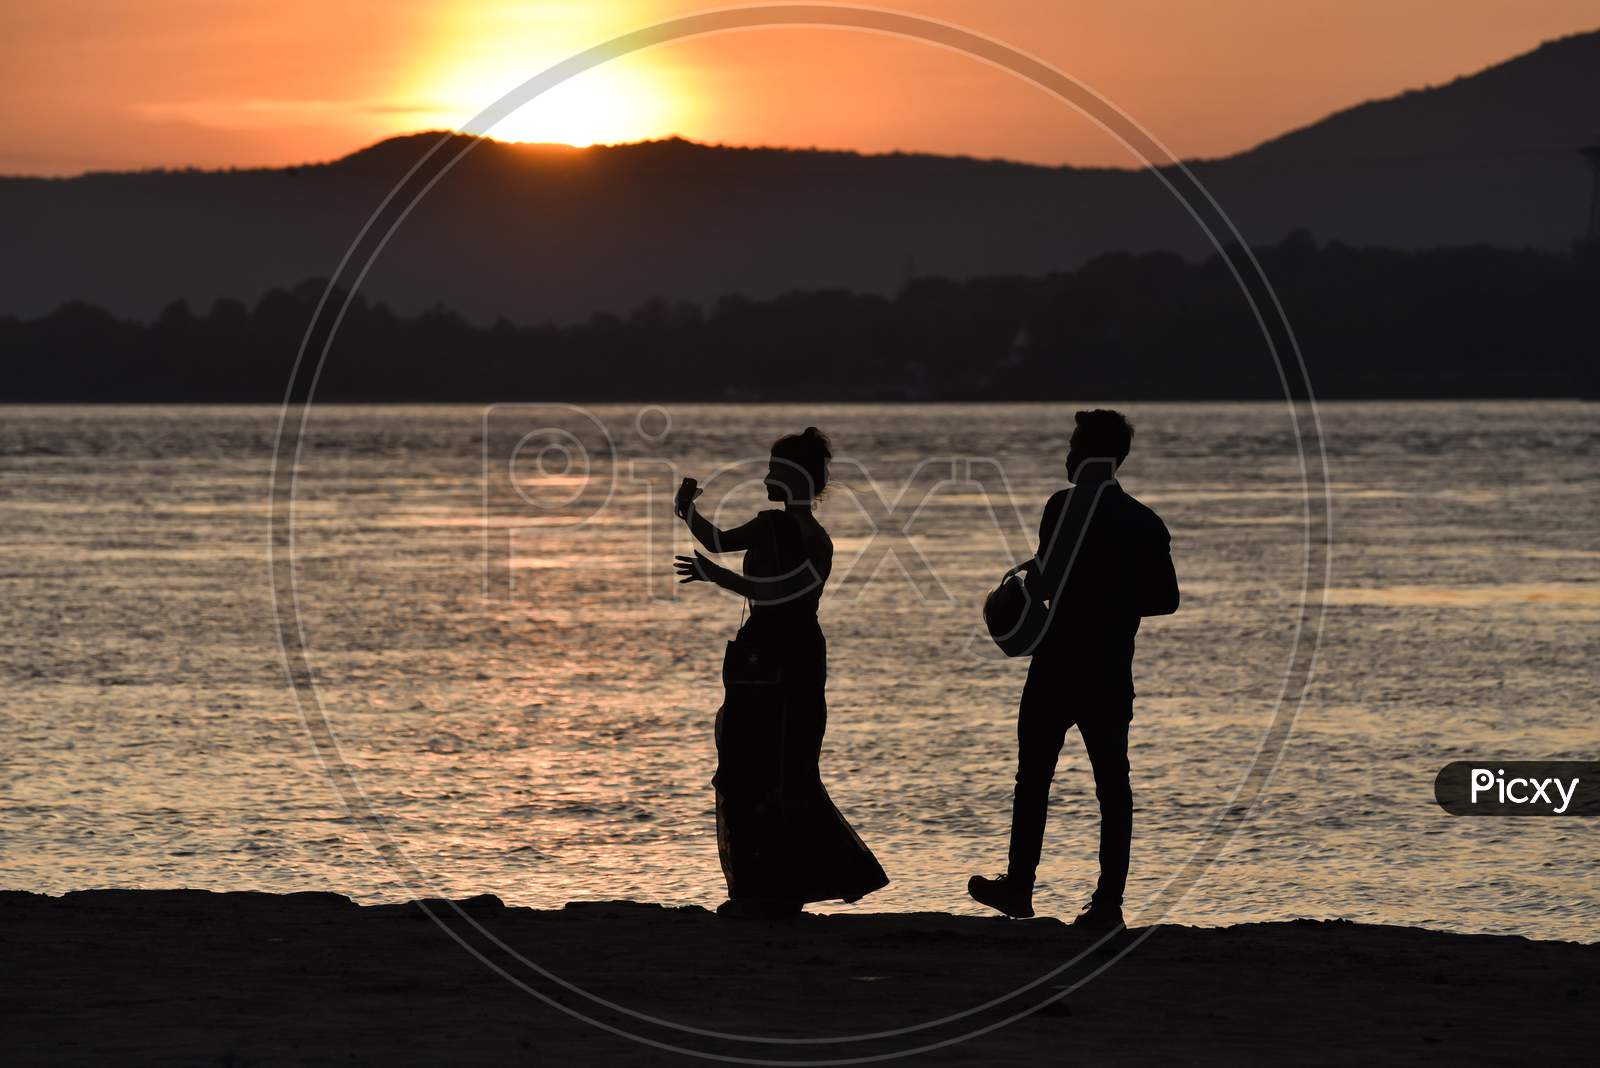 A Couple Takes Selfie During Sunset In The Banks Of The Brahmaputra River, In Guwahati, Assam, India